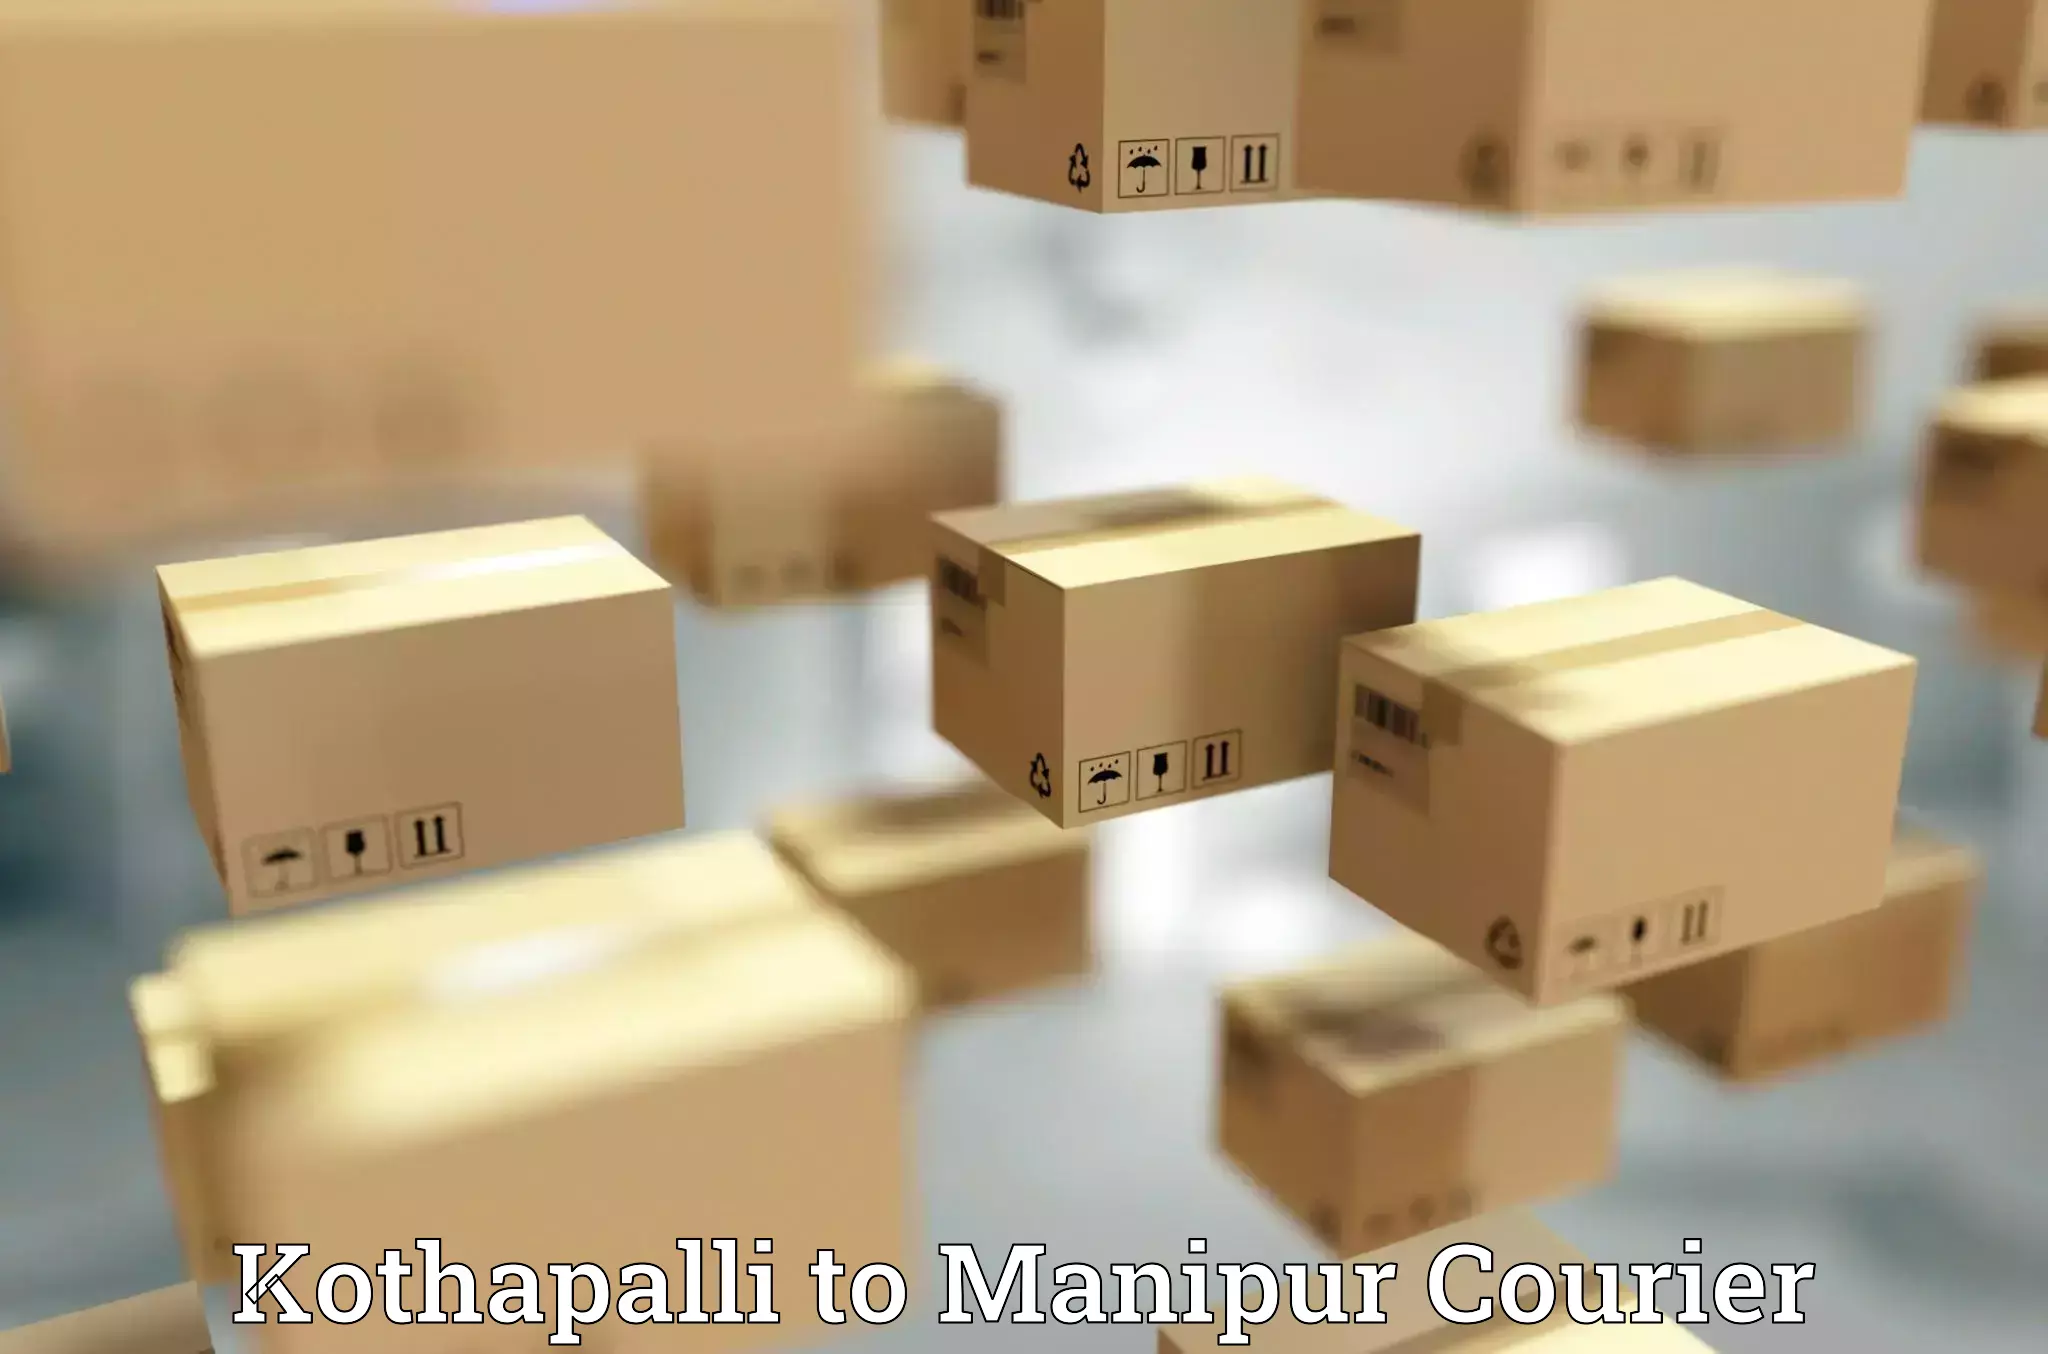 Supply chain efficiency Kothapalli to Manipur